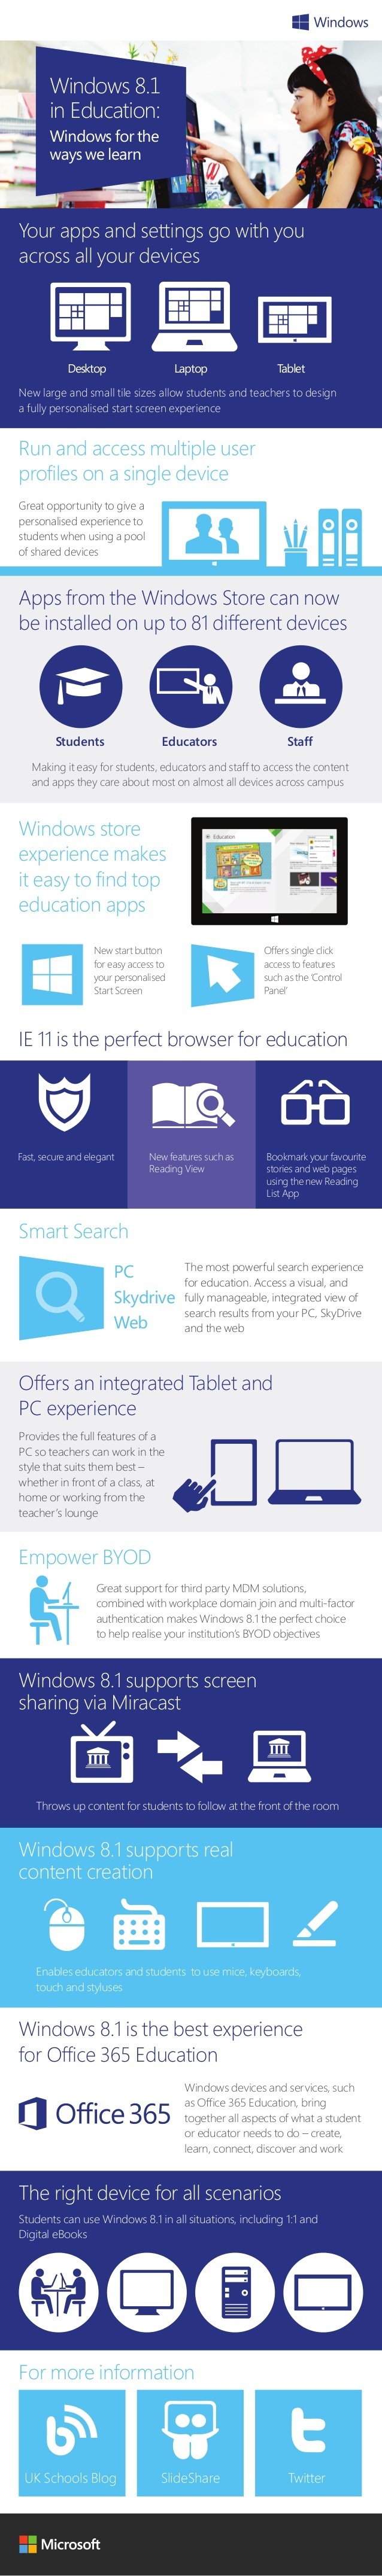 Windows 8.1 in Education Infographic